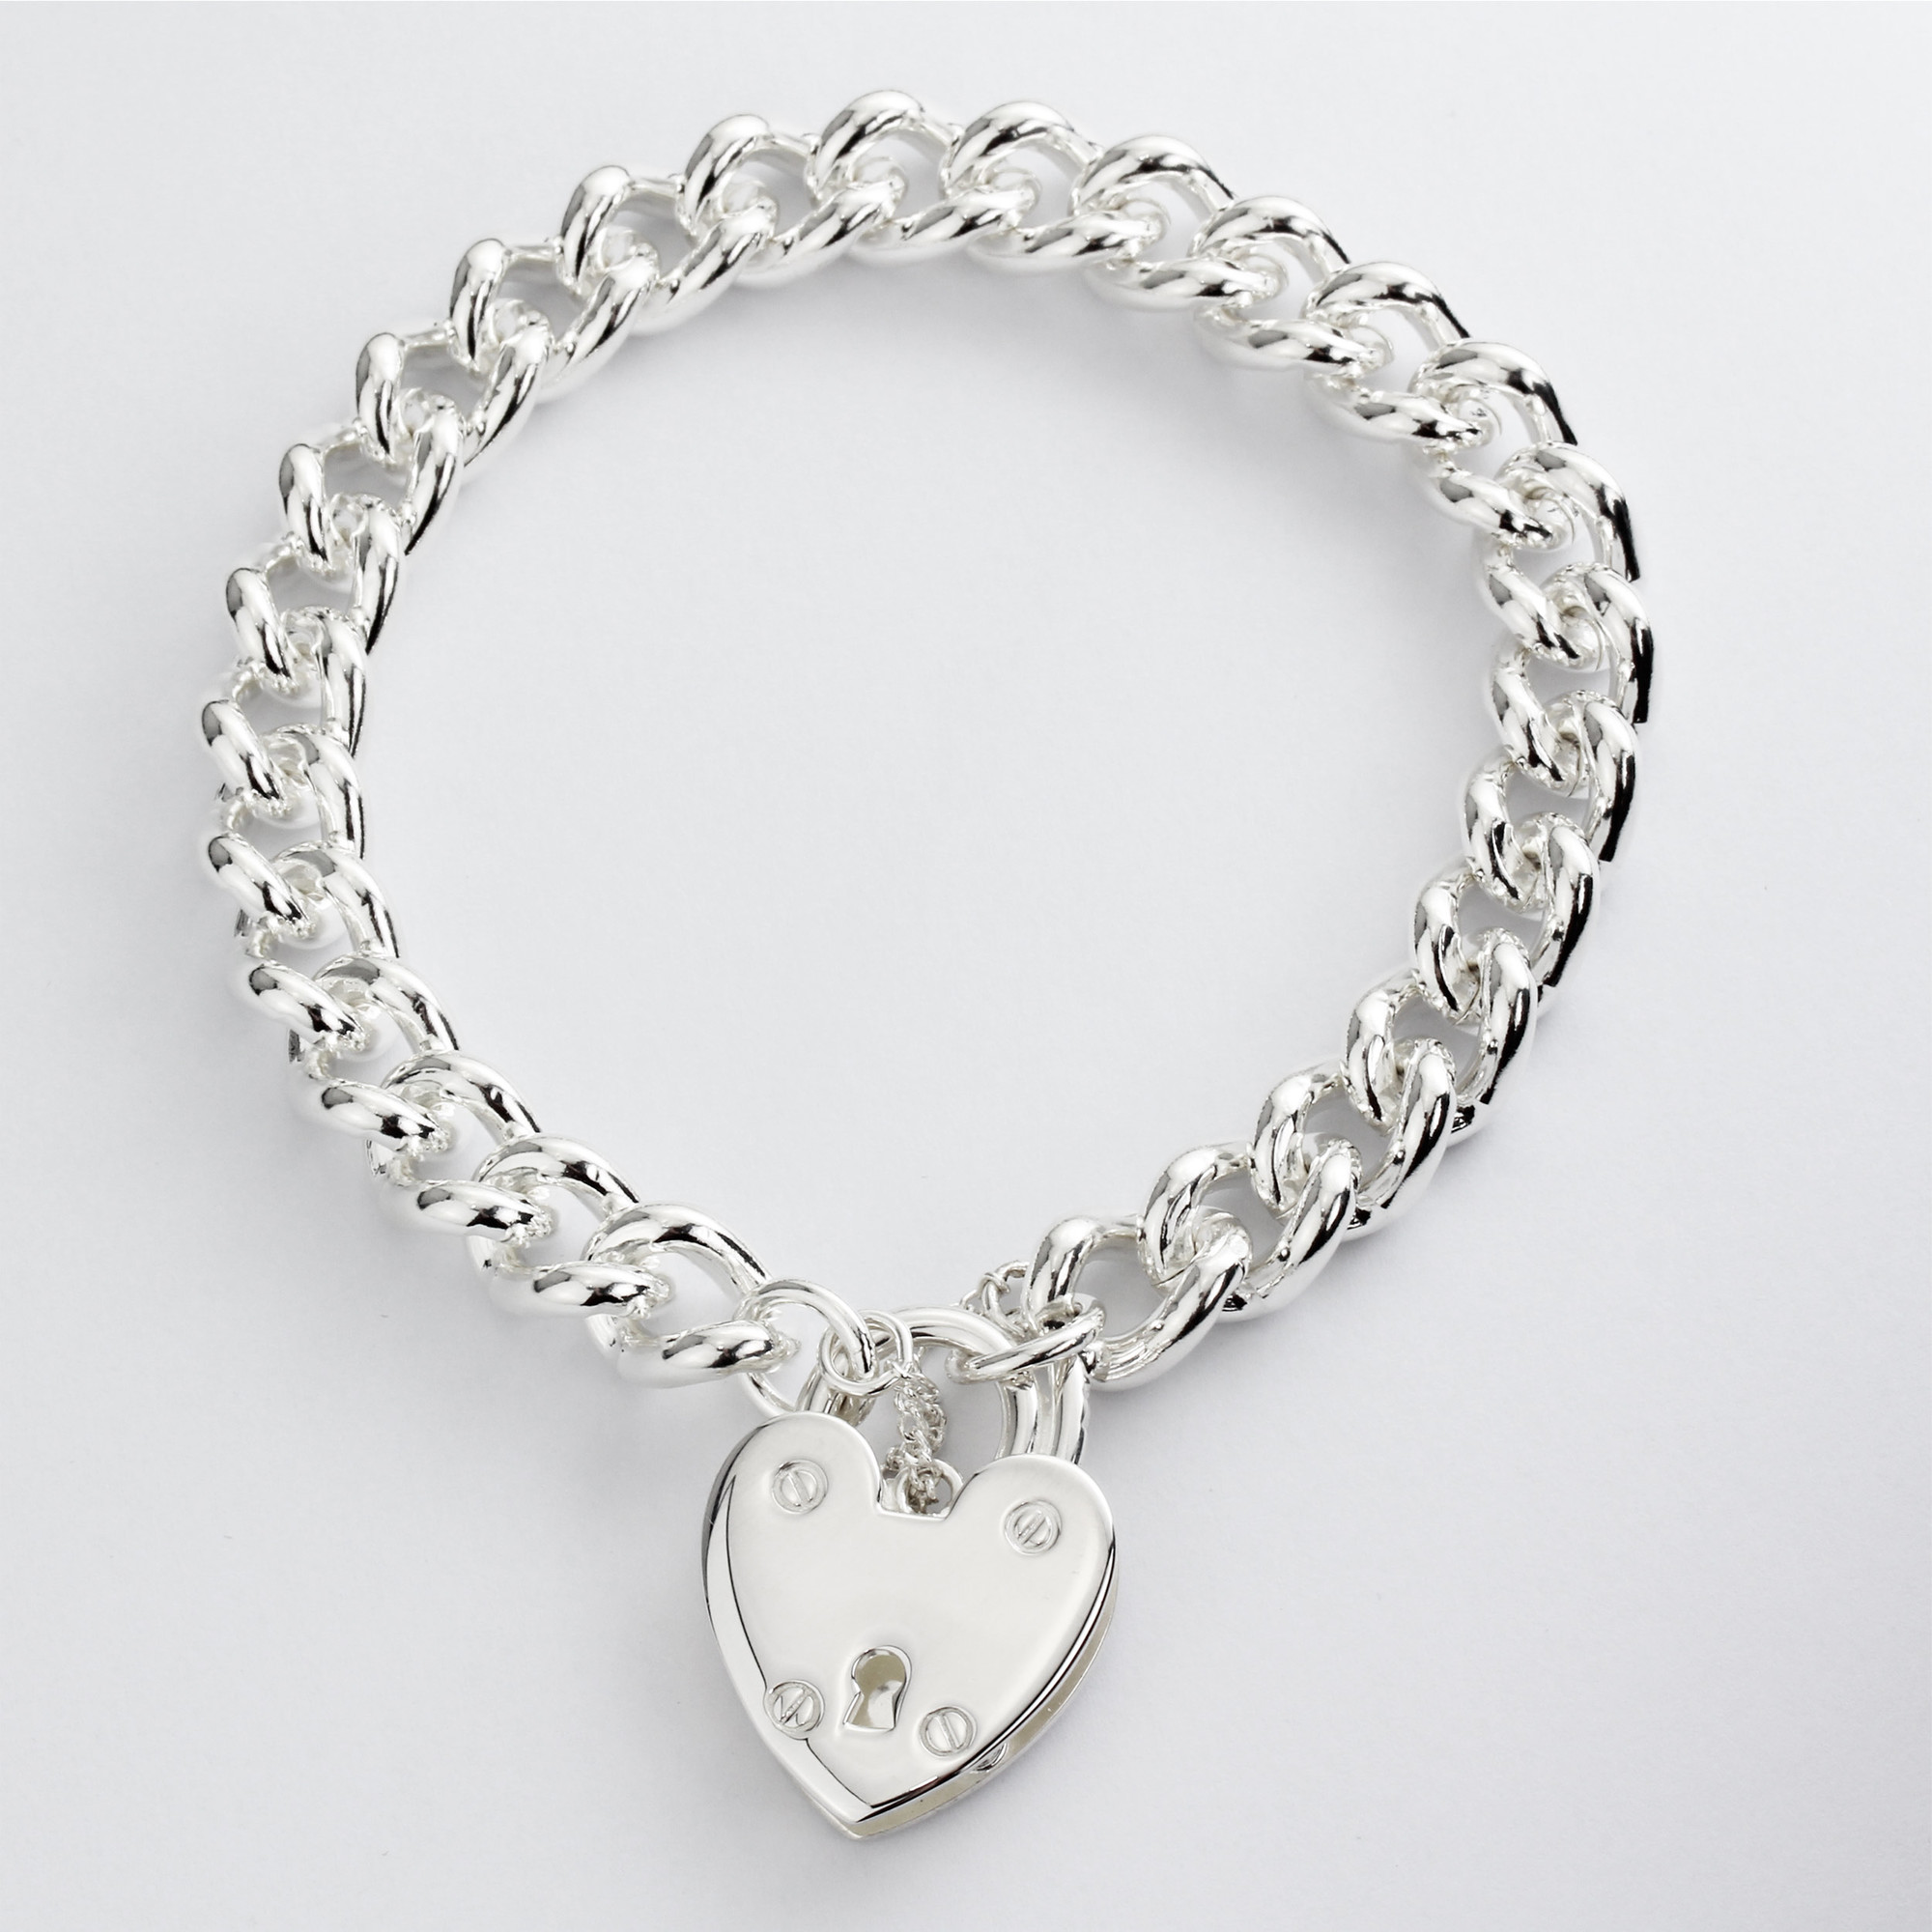 Heavy Solid Silver Charm Bracelet With Large Padlock Closure | Free ...